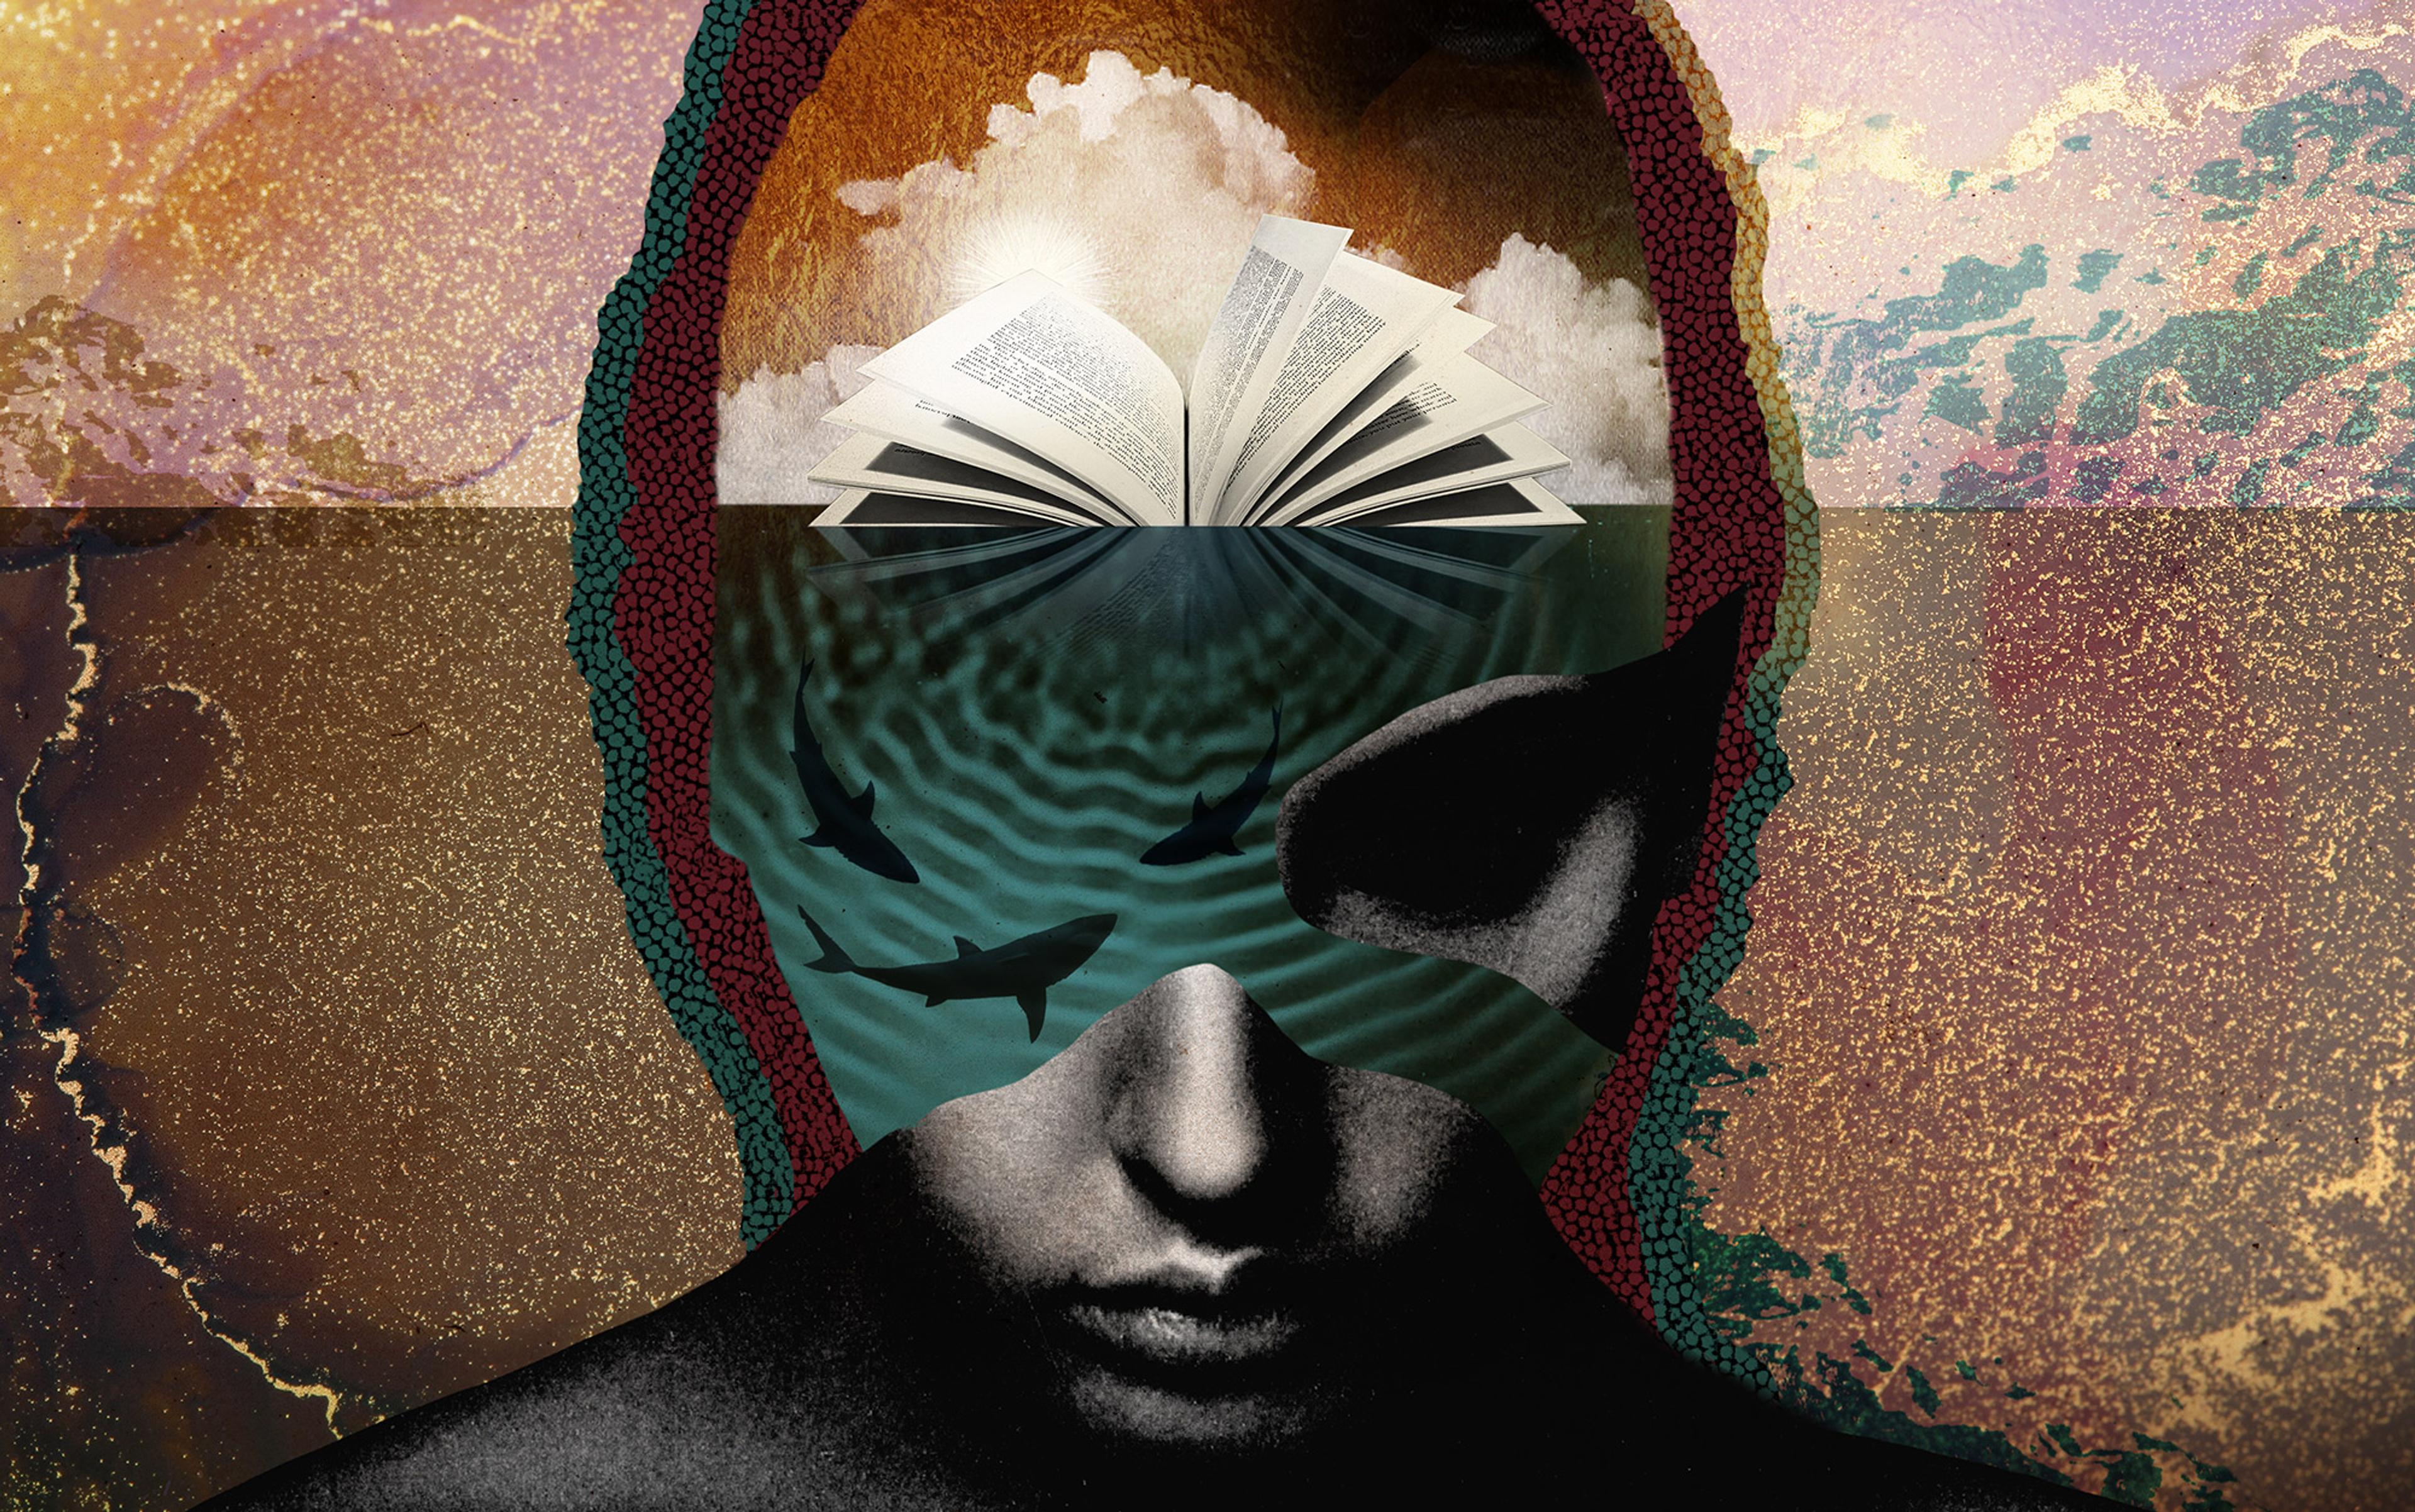 Surreal artwork of a human head; top section with an open book and clouds, bottom section as deep water with sharks, all set in an abstract background.